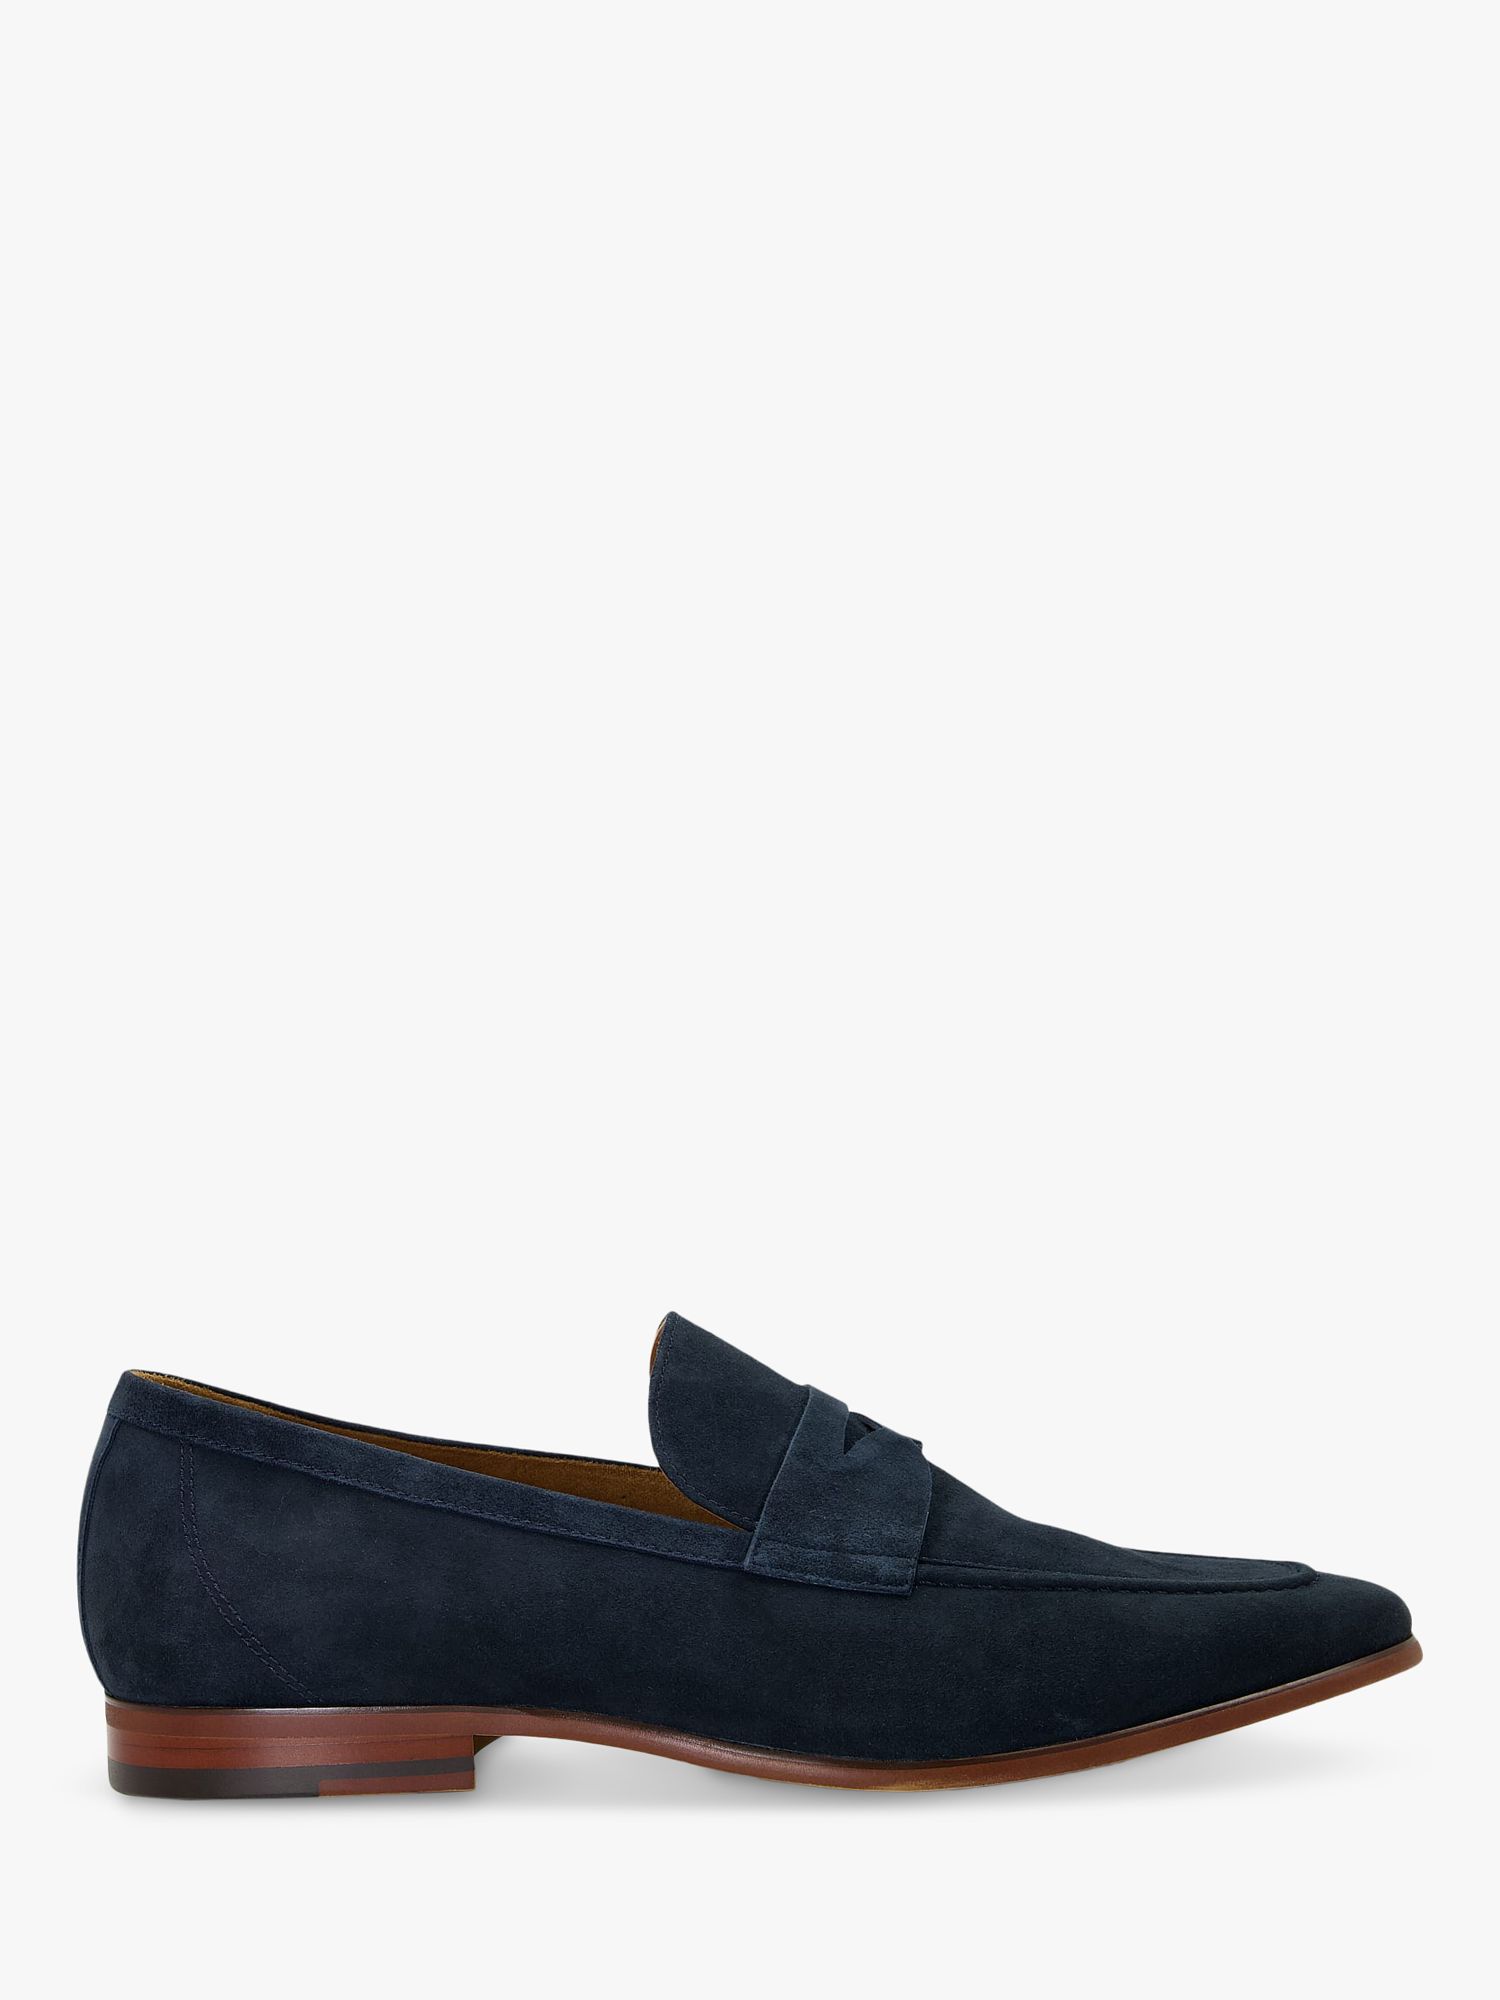 Dune Silas Suede Loafers